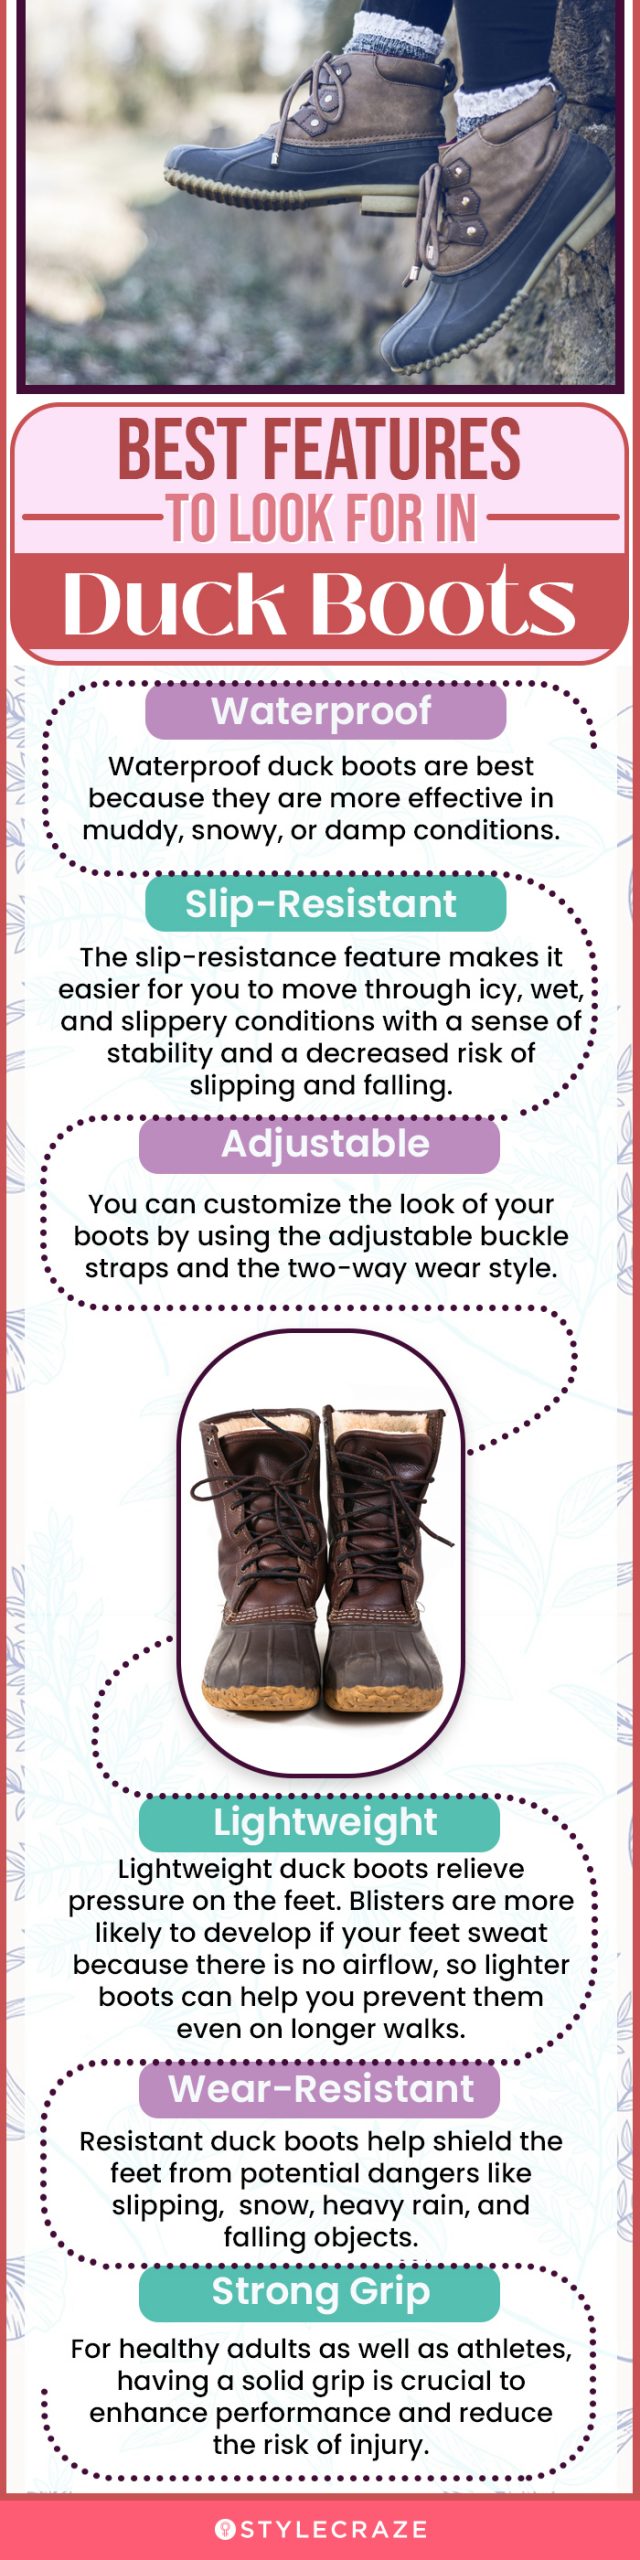 Best Features to Look For in Duck Boots (infographic)